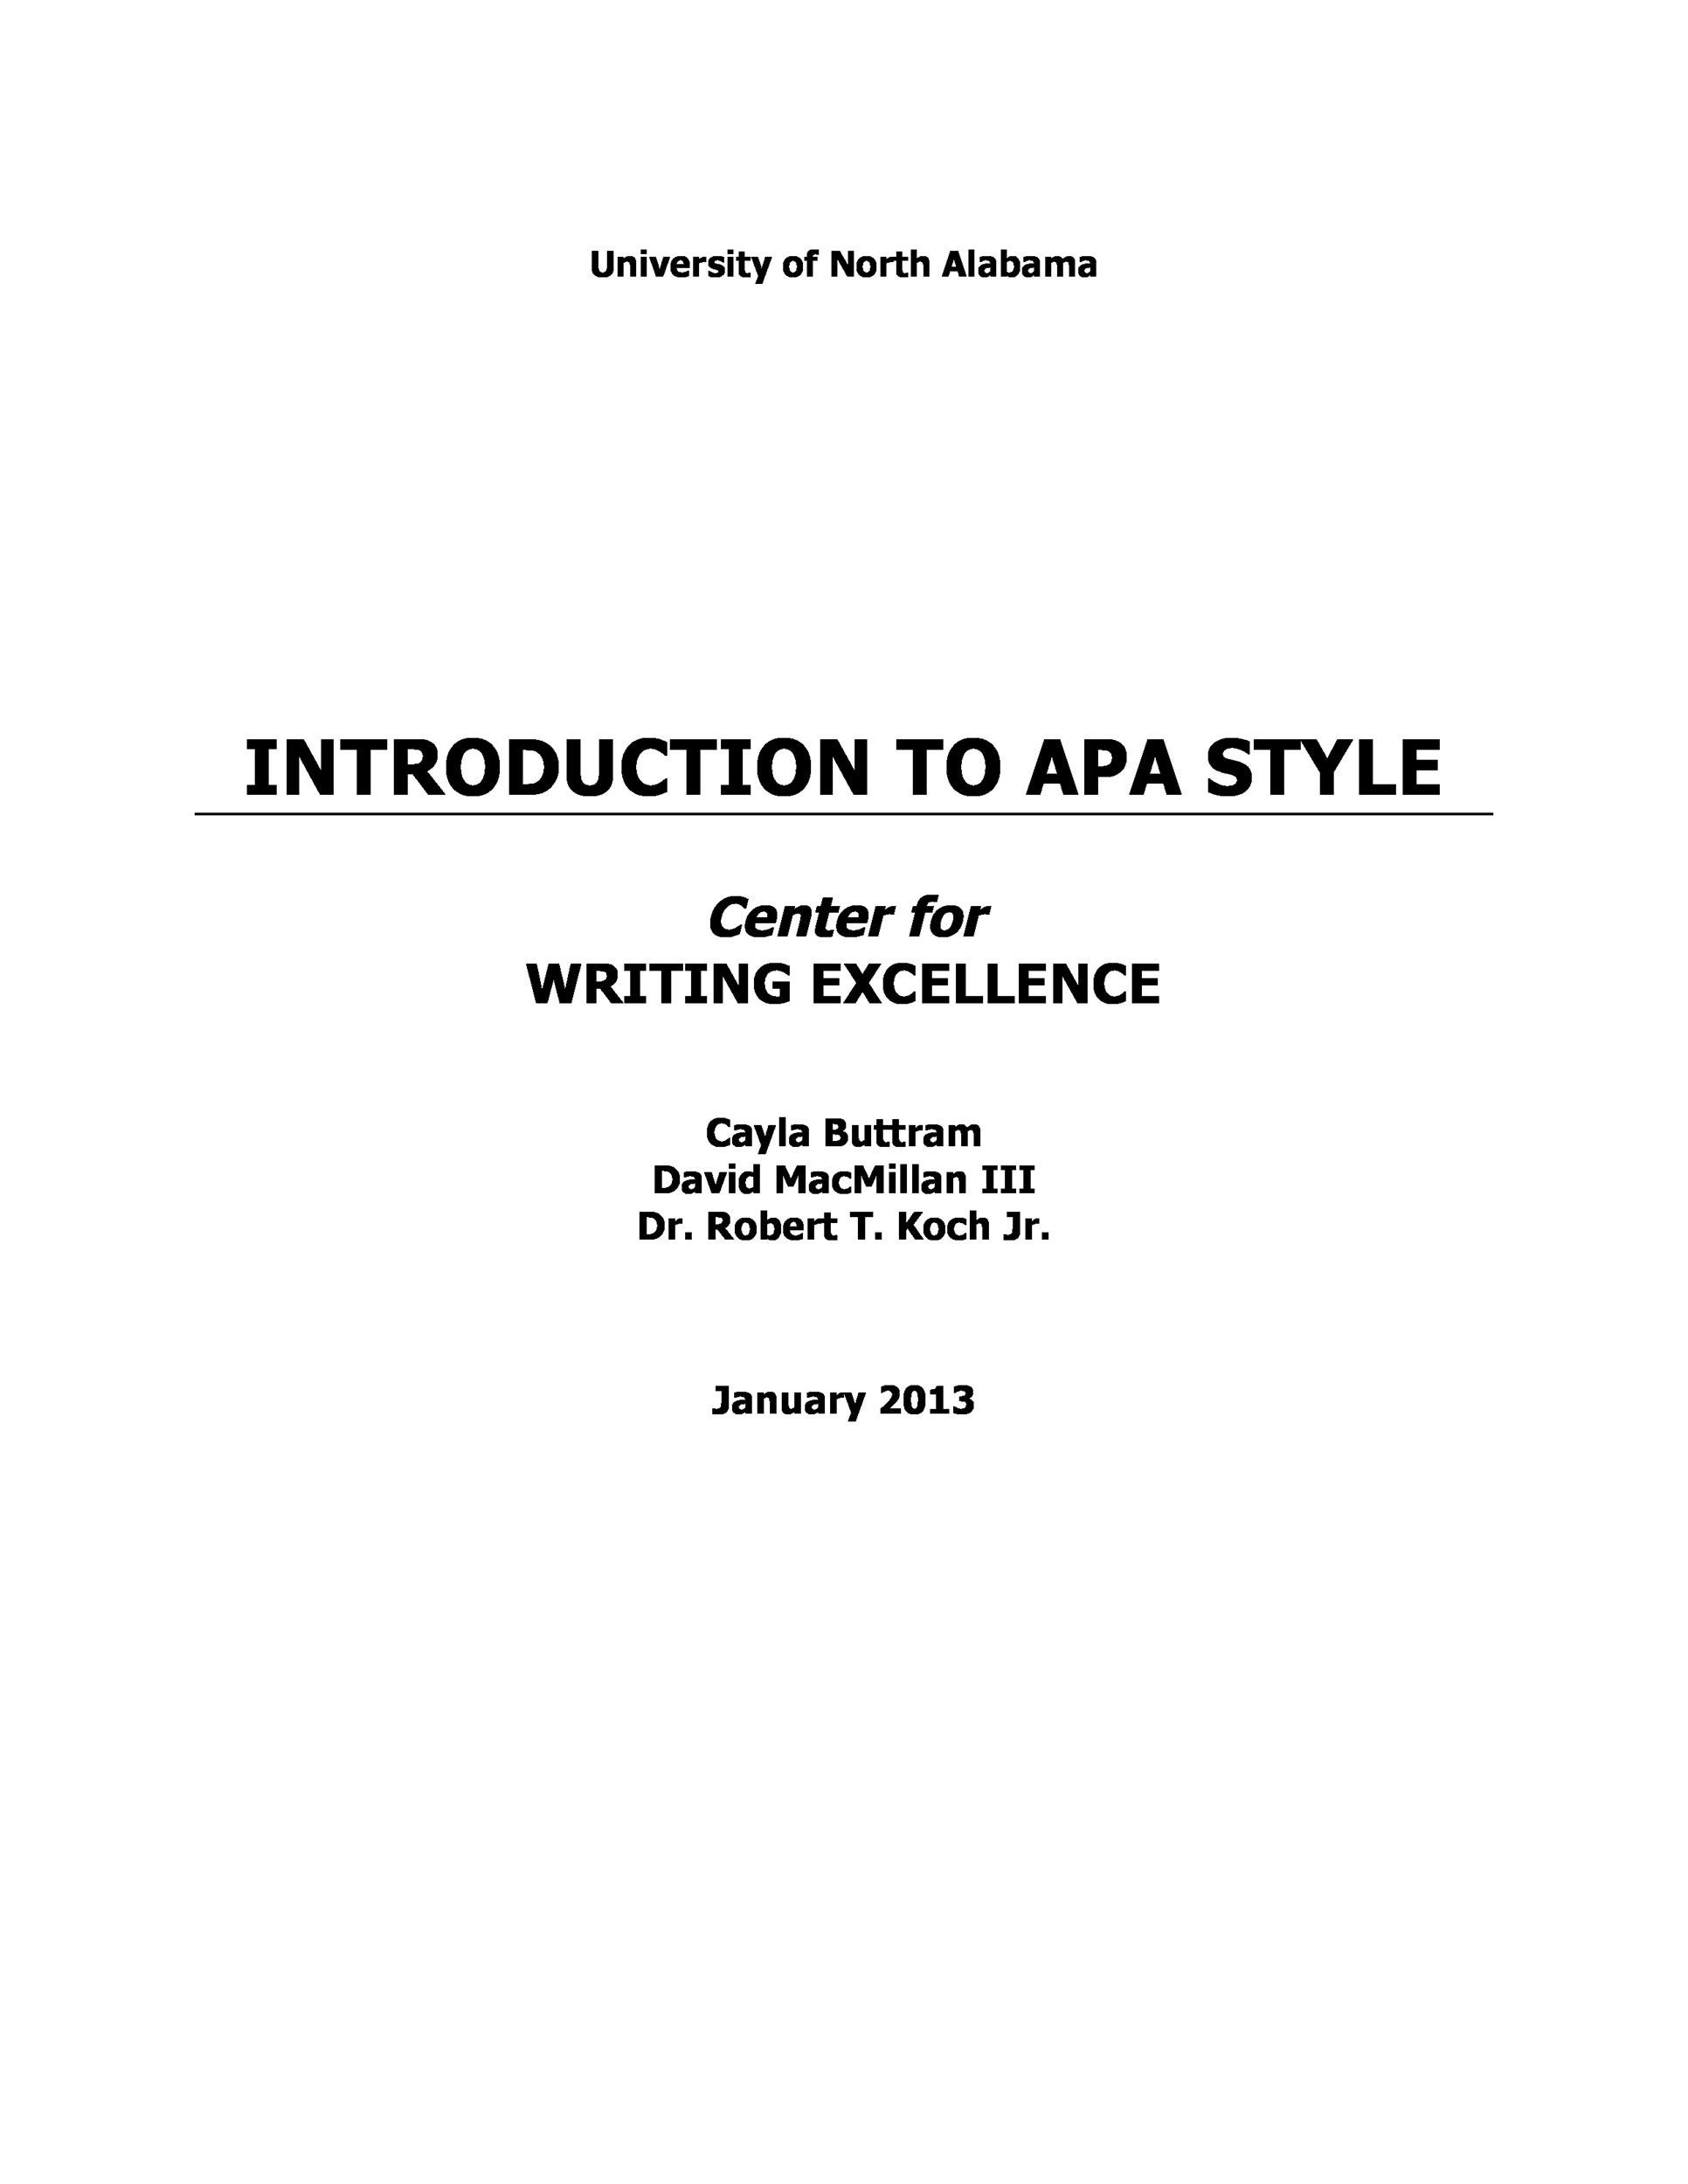 how to write an abstract for a research paper apa